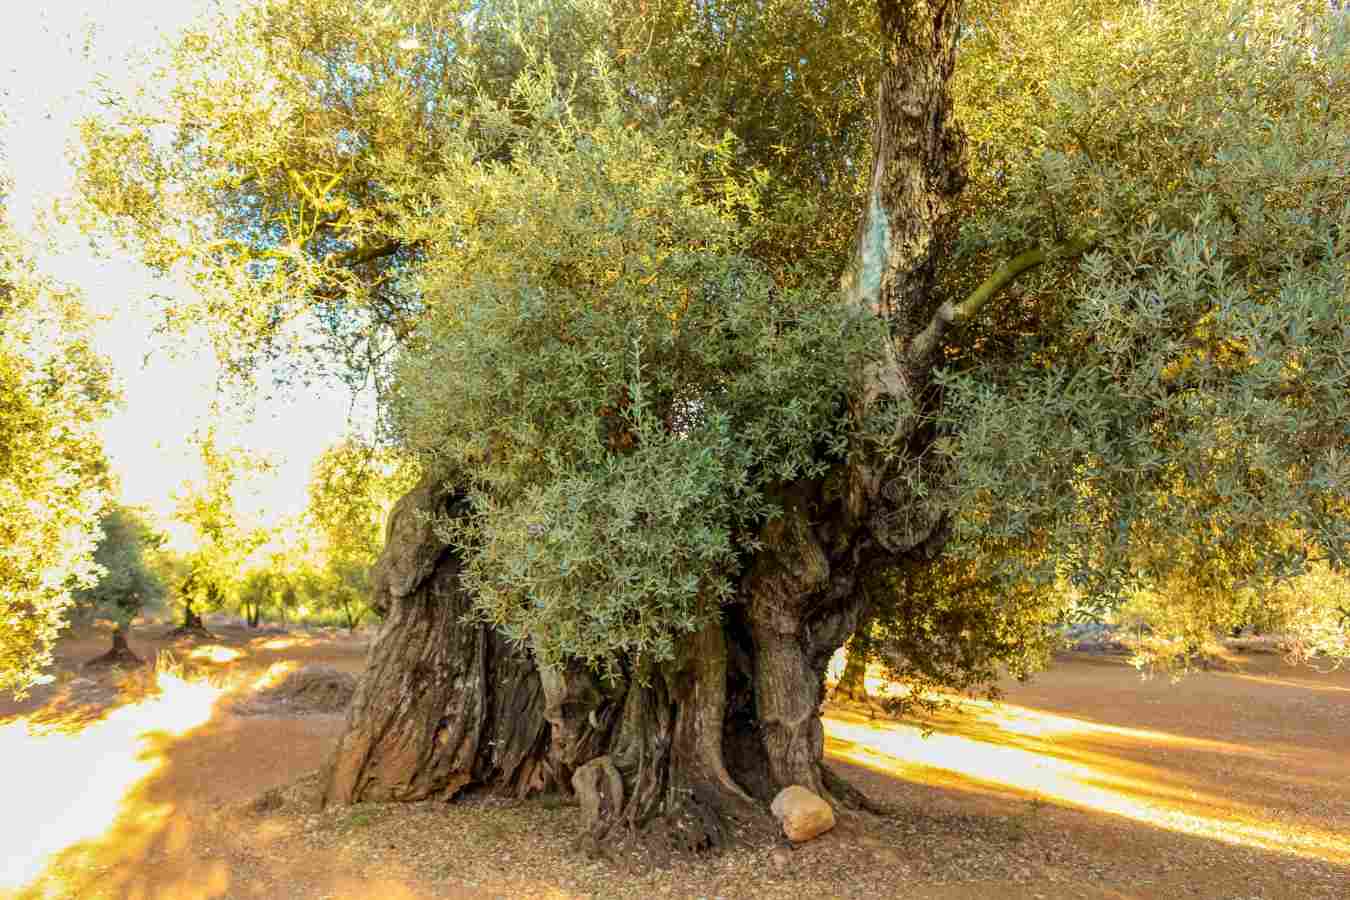 Ancient olives trees